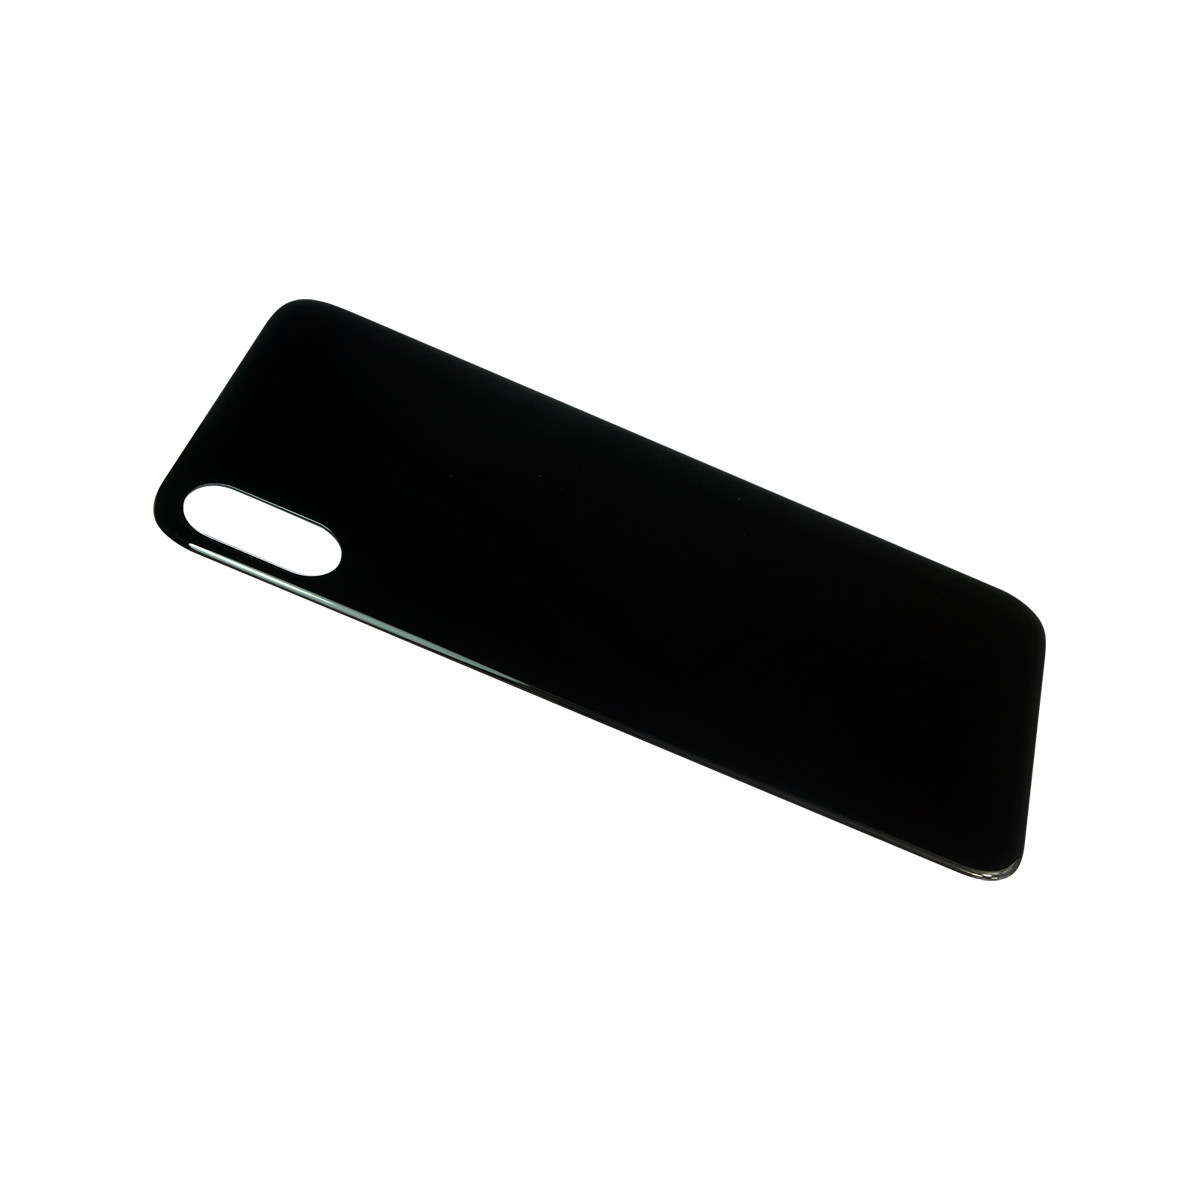 iPhone X Rear Glass with Large Camera Hole